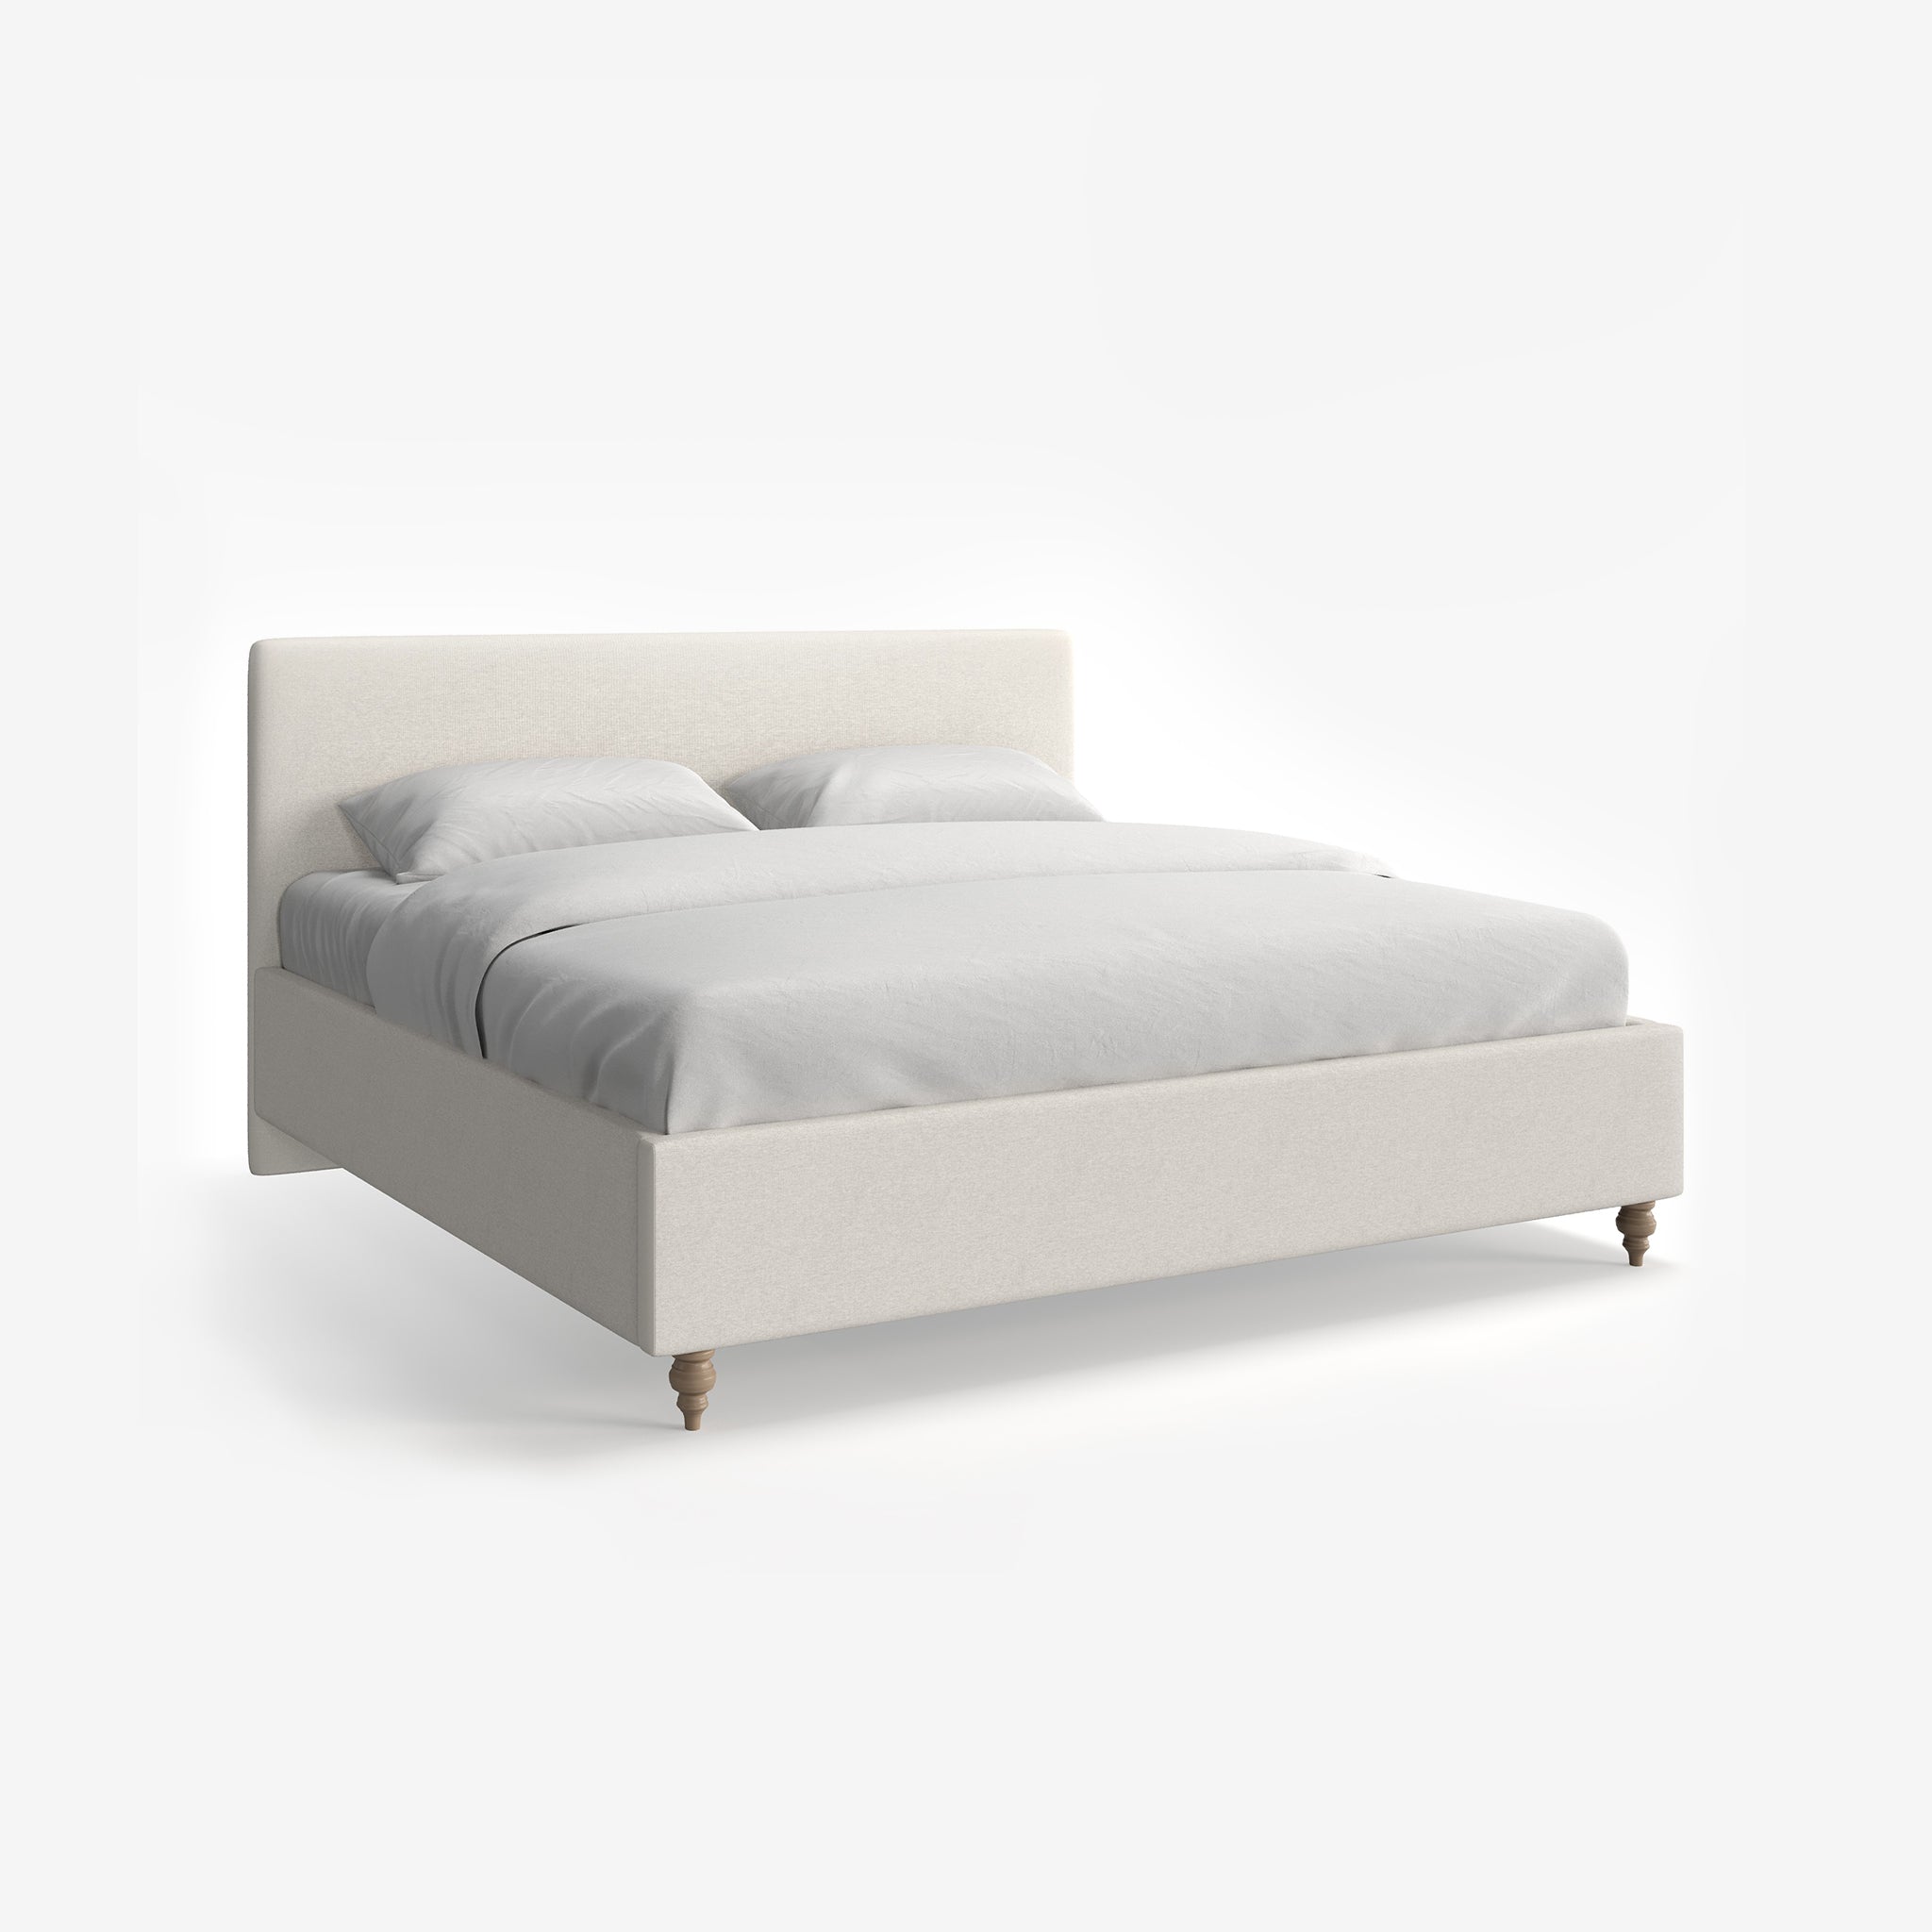 O'Halloran Cotton Linen Upholstered Bed with end-lift Ottoman Storage, Contemporary Interiors, Online Shopping, Craftsmanship, Wooden feet, Bazaar